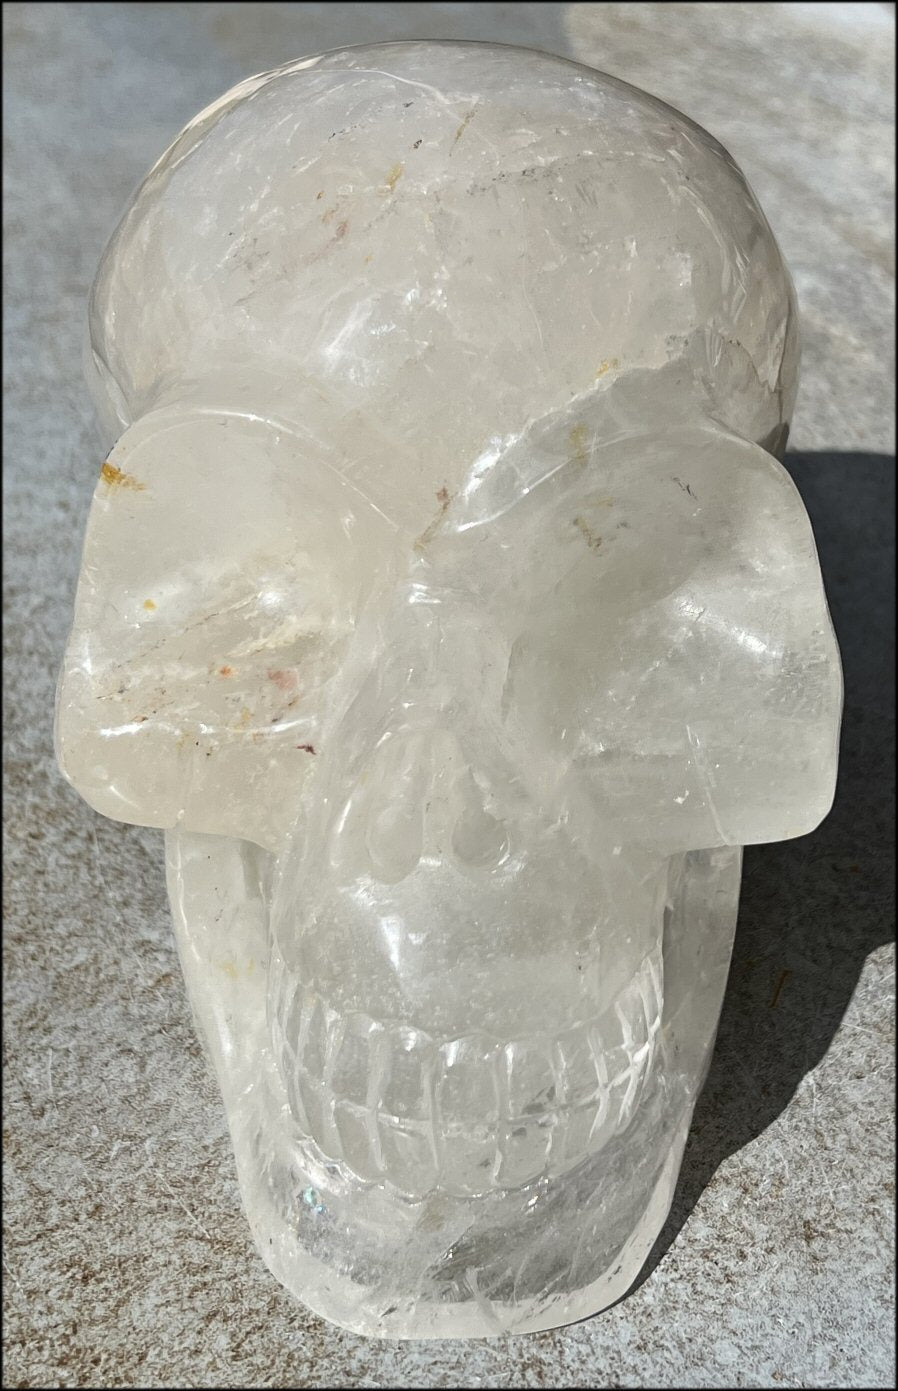 LifeSize Himalayan Quartz Crystal Skull with Multi-Colored Hematite, Golden Healer veils, Shimmery Rainbows - Just under 13lbs